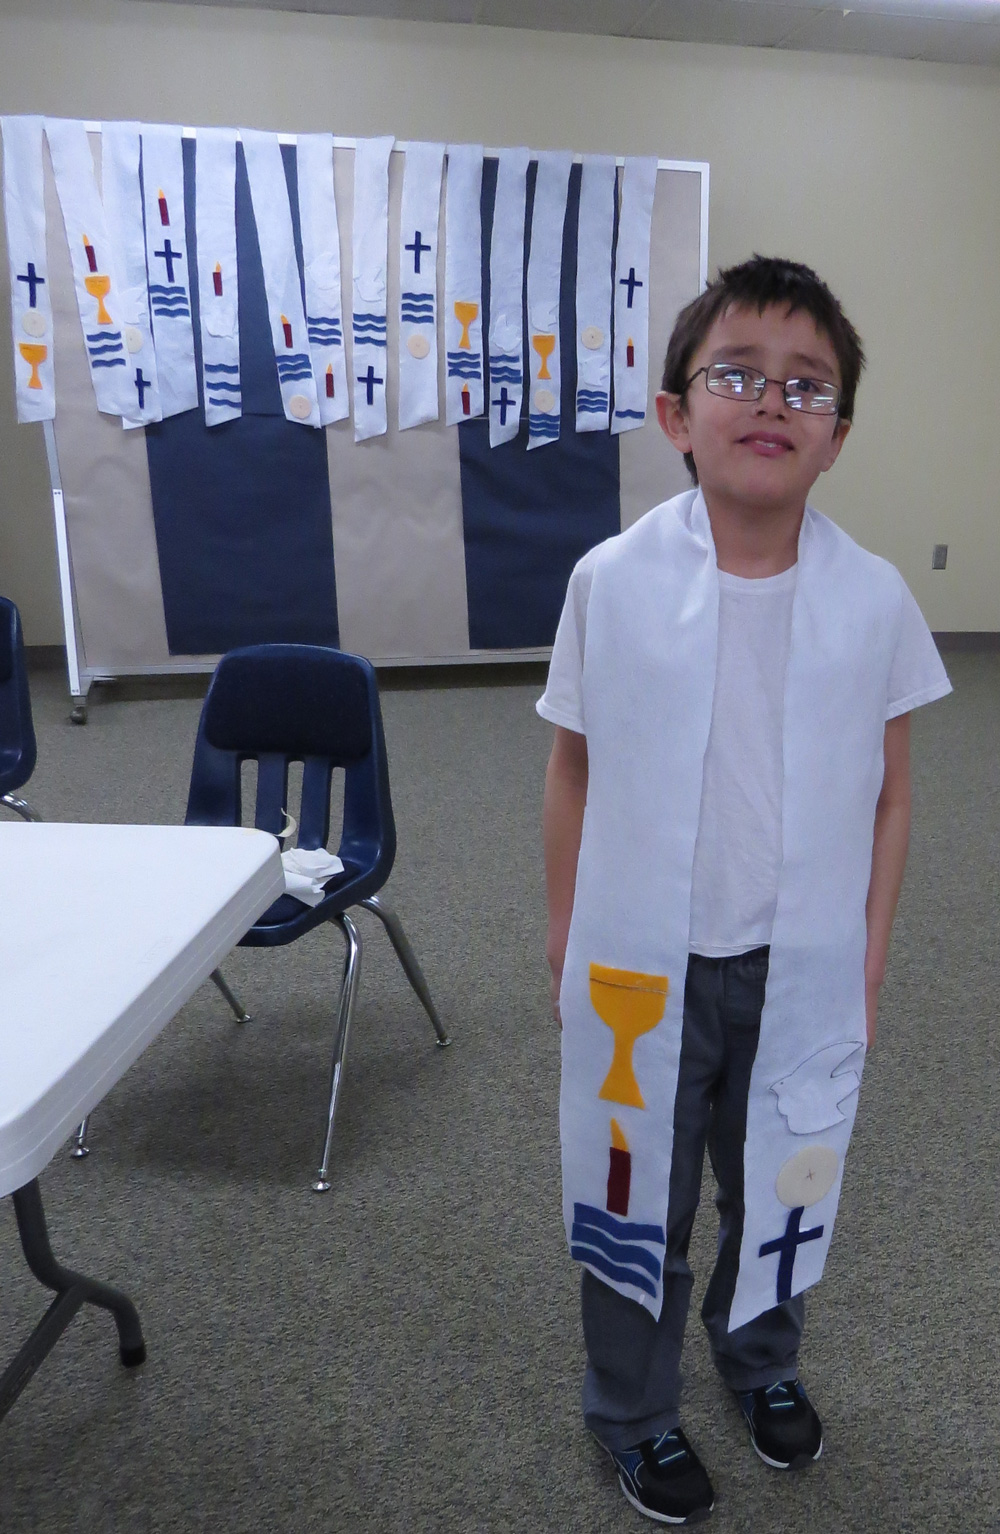 The students made stoles decorated with symbols relating to the sacraments and will wear them when they are baptized.